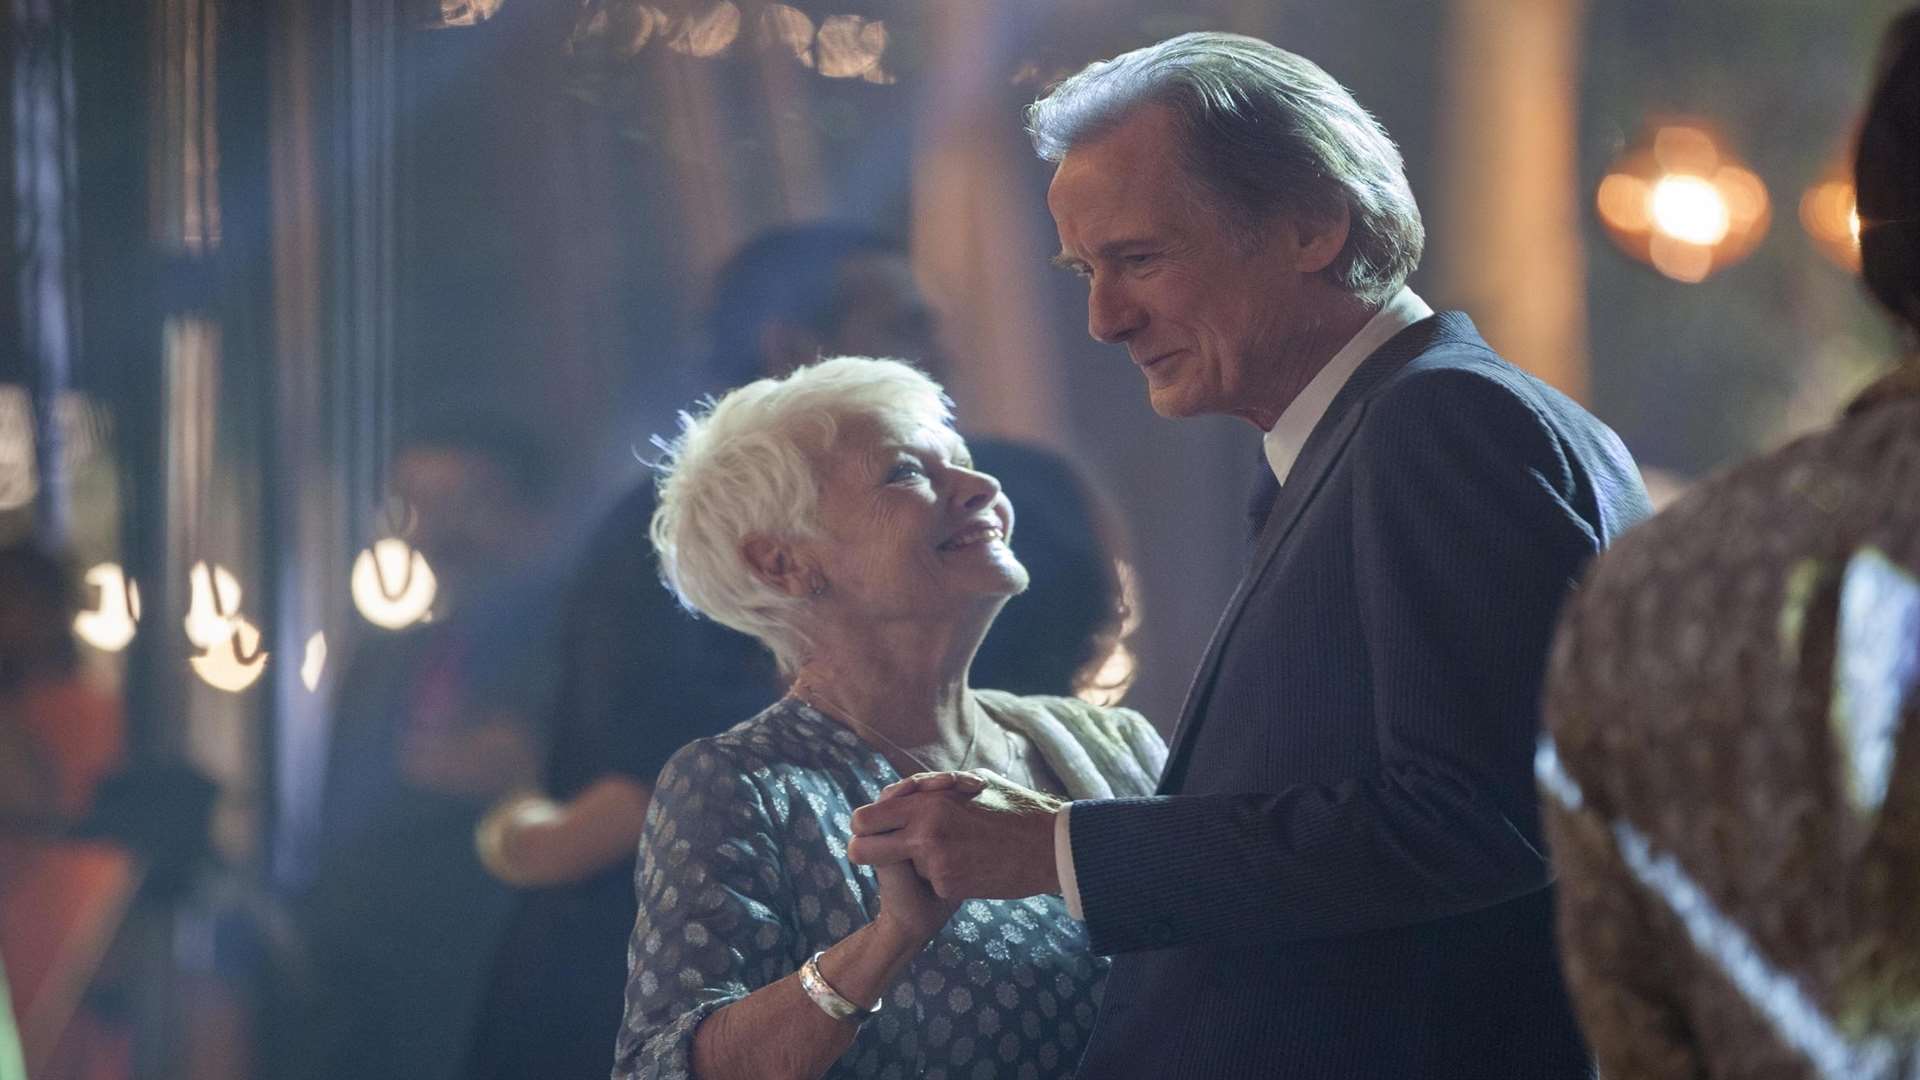 The Second Best Exotic Marigold Hotel stars an ensemble cast including Judi Dench and Bill Nighy